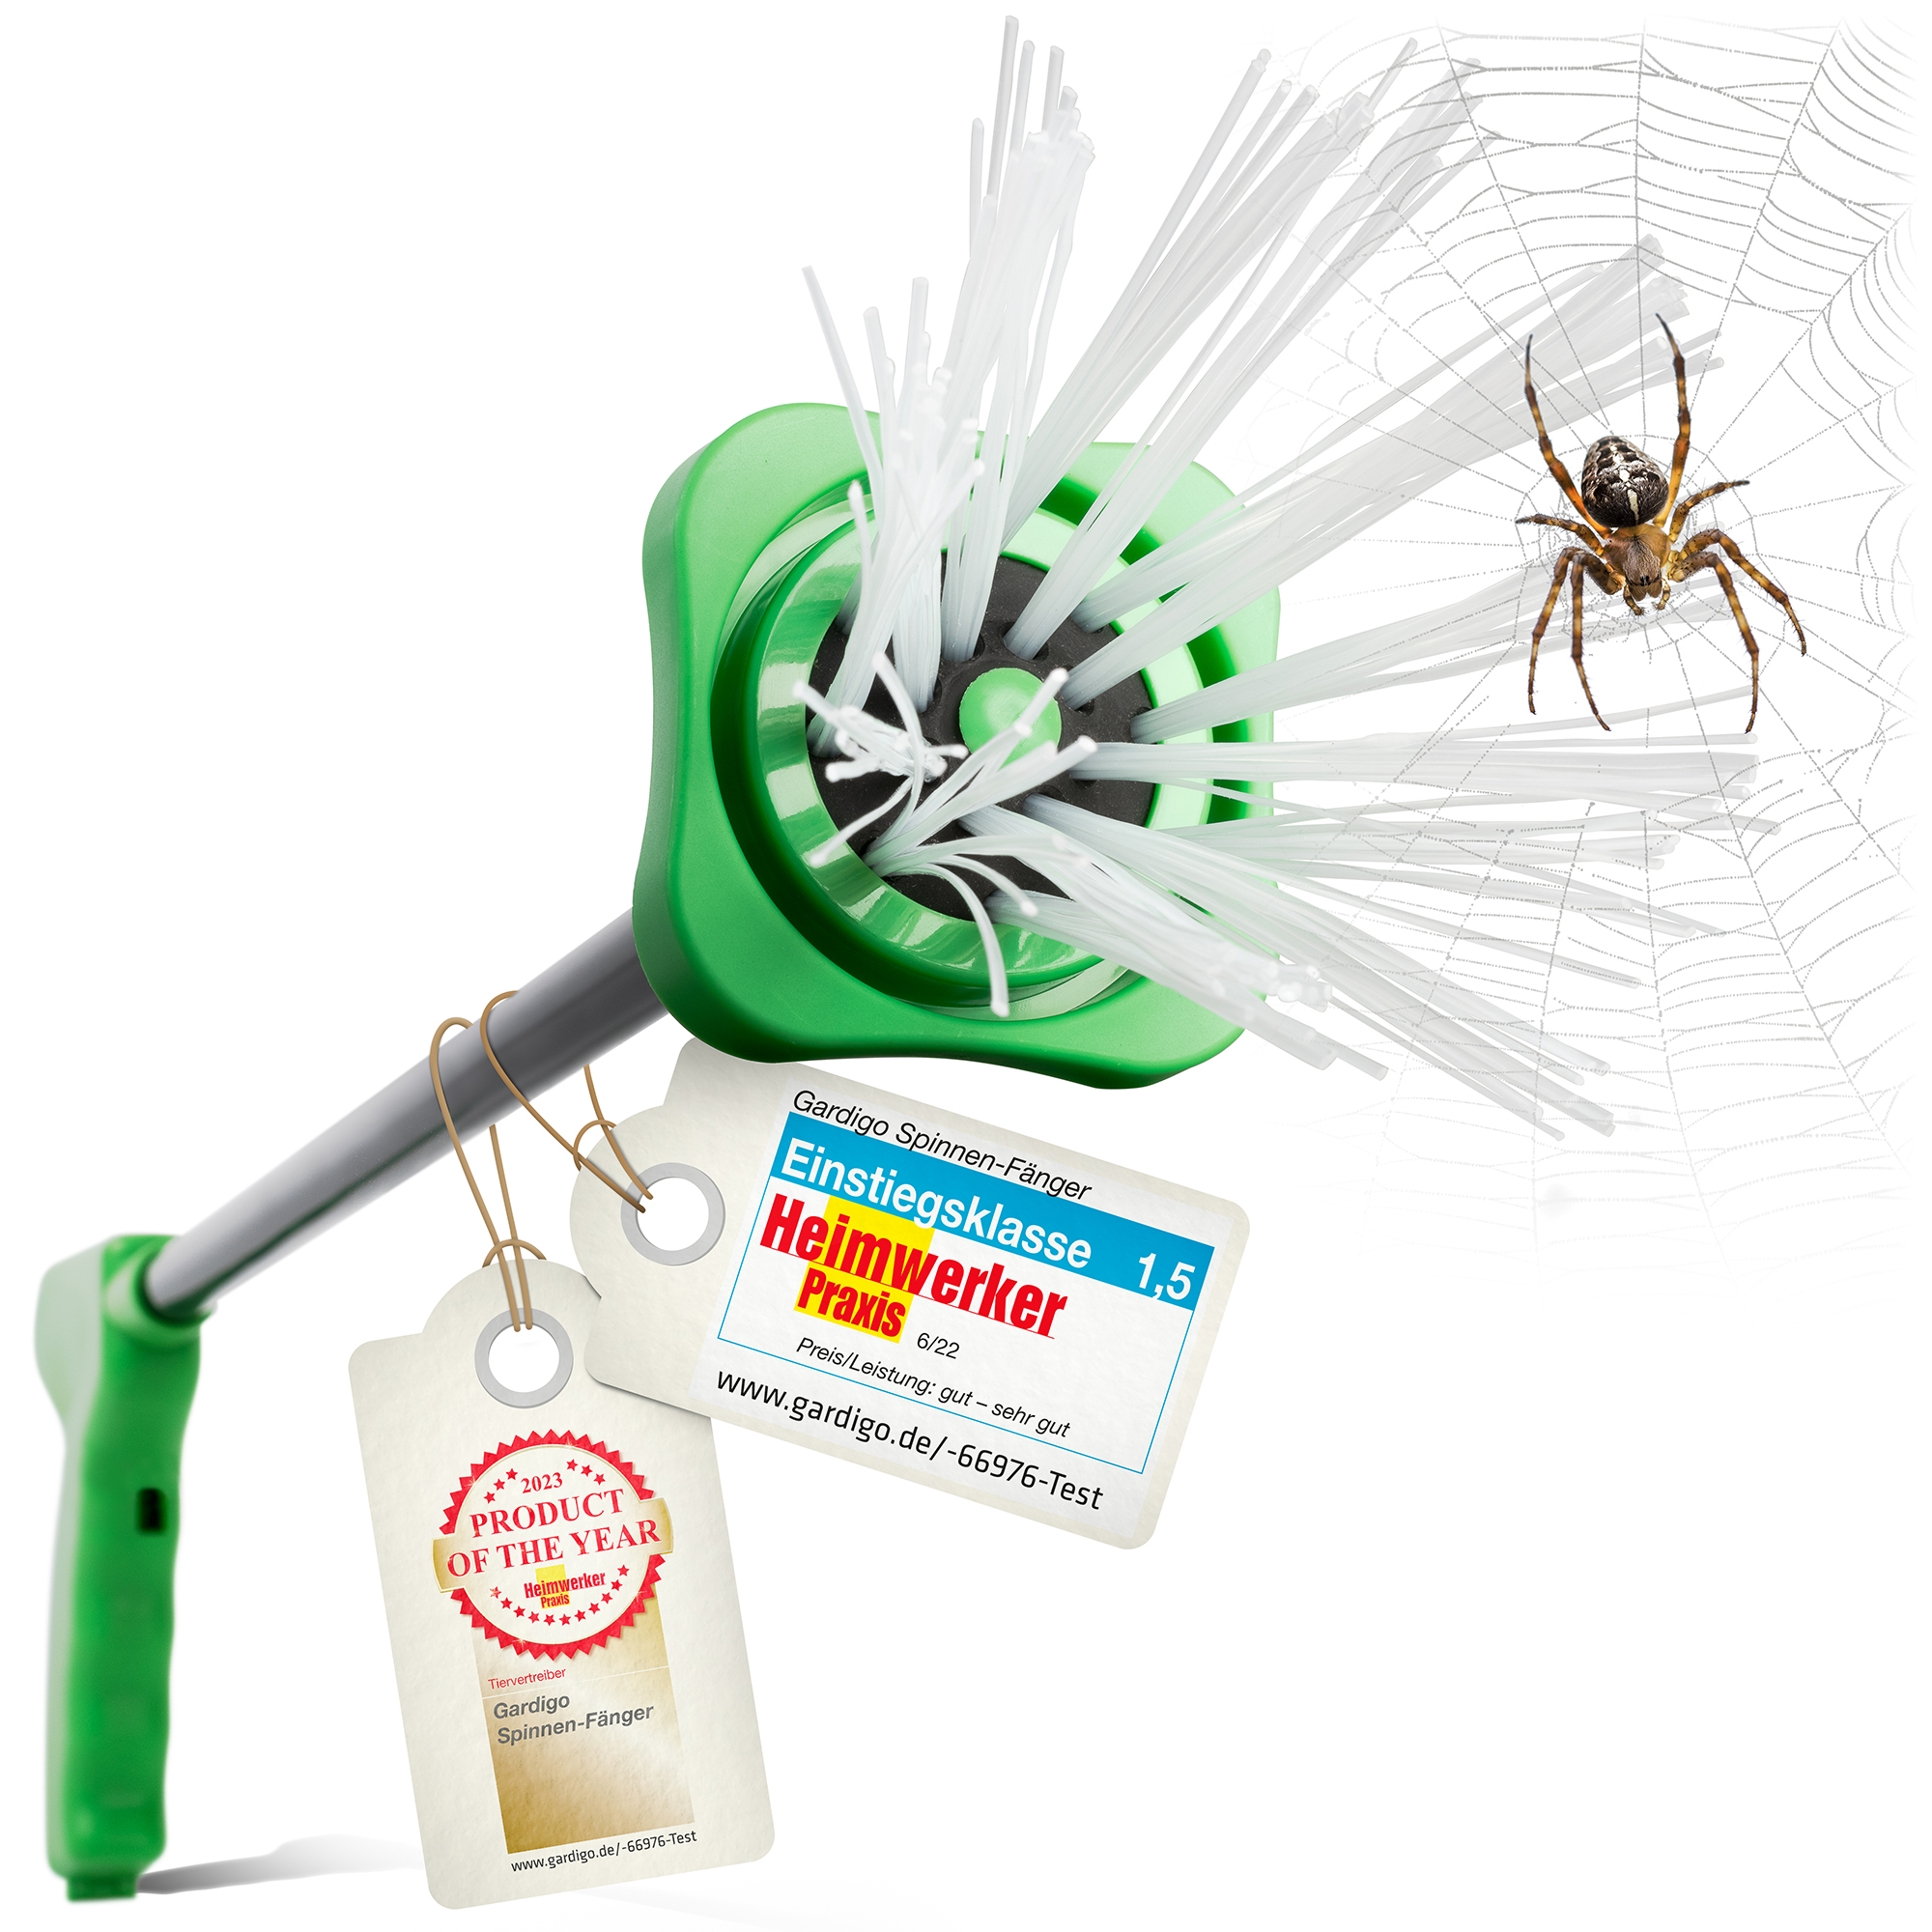 Spider Catcher, insect grabber